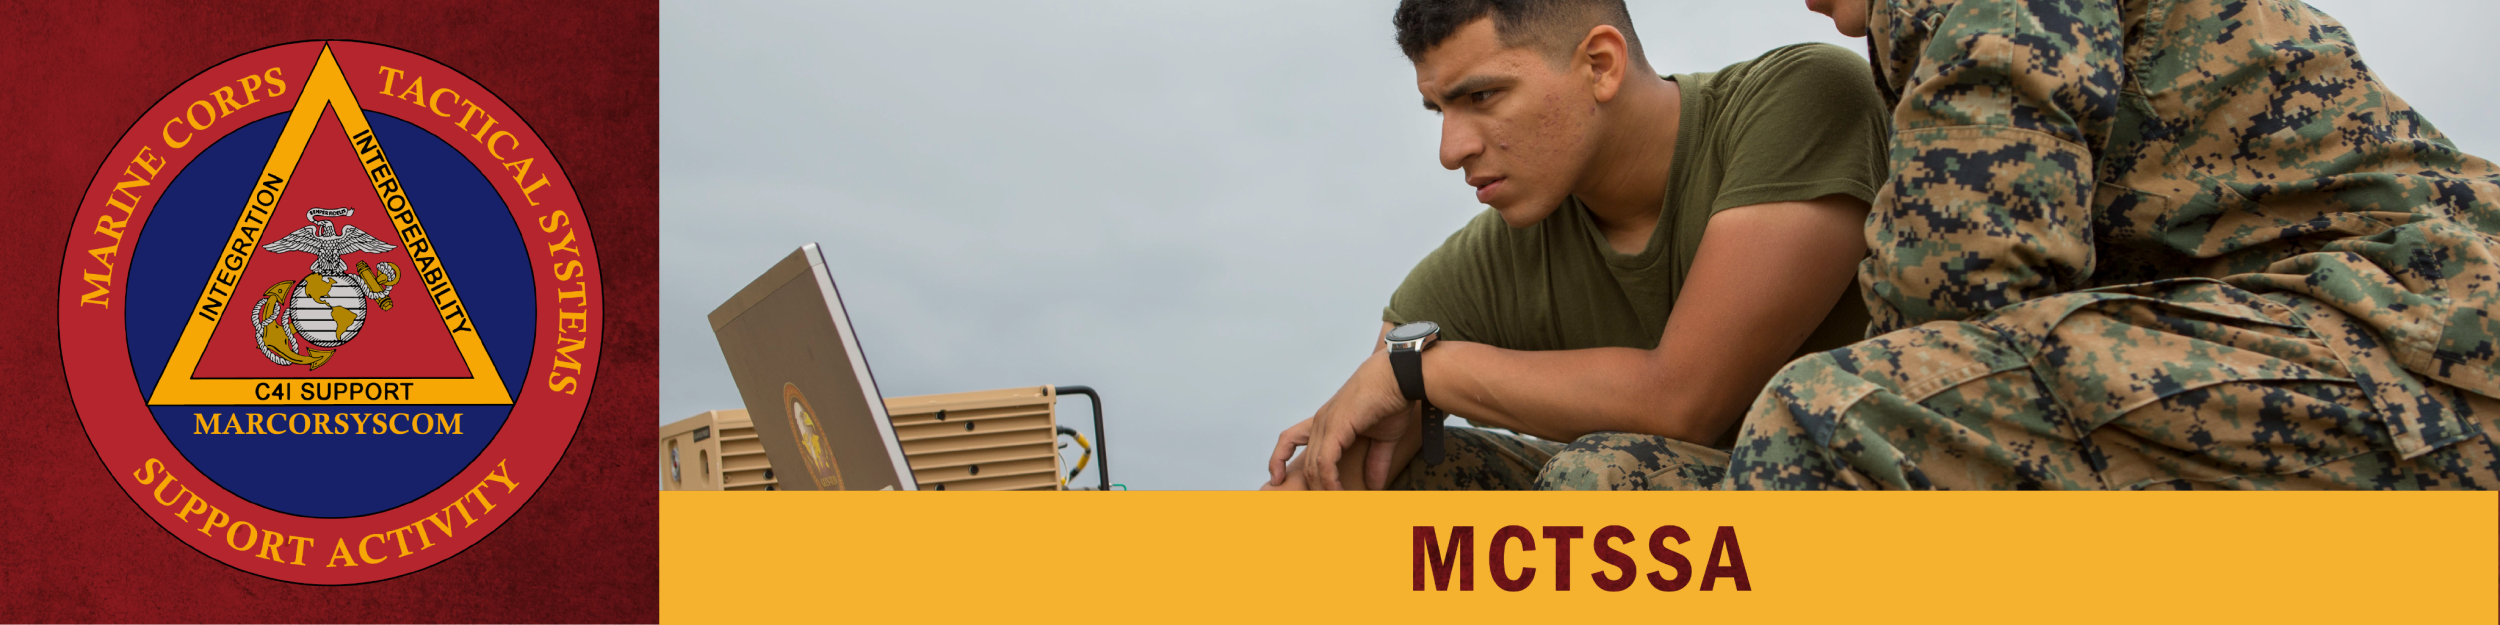 Graphic with seal for MCTSSA, includes photo of Marines, text below reads MCTSSA